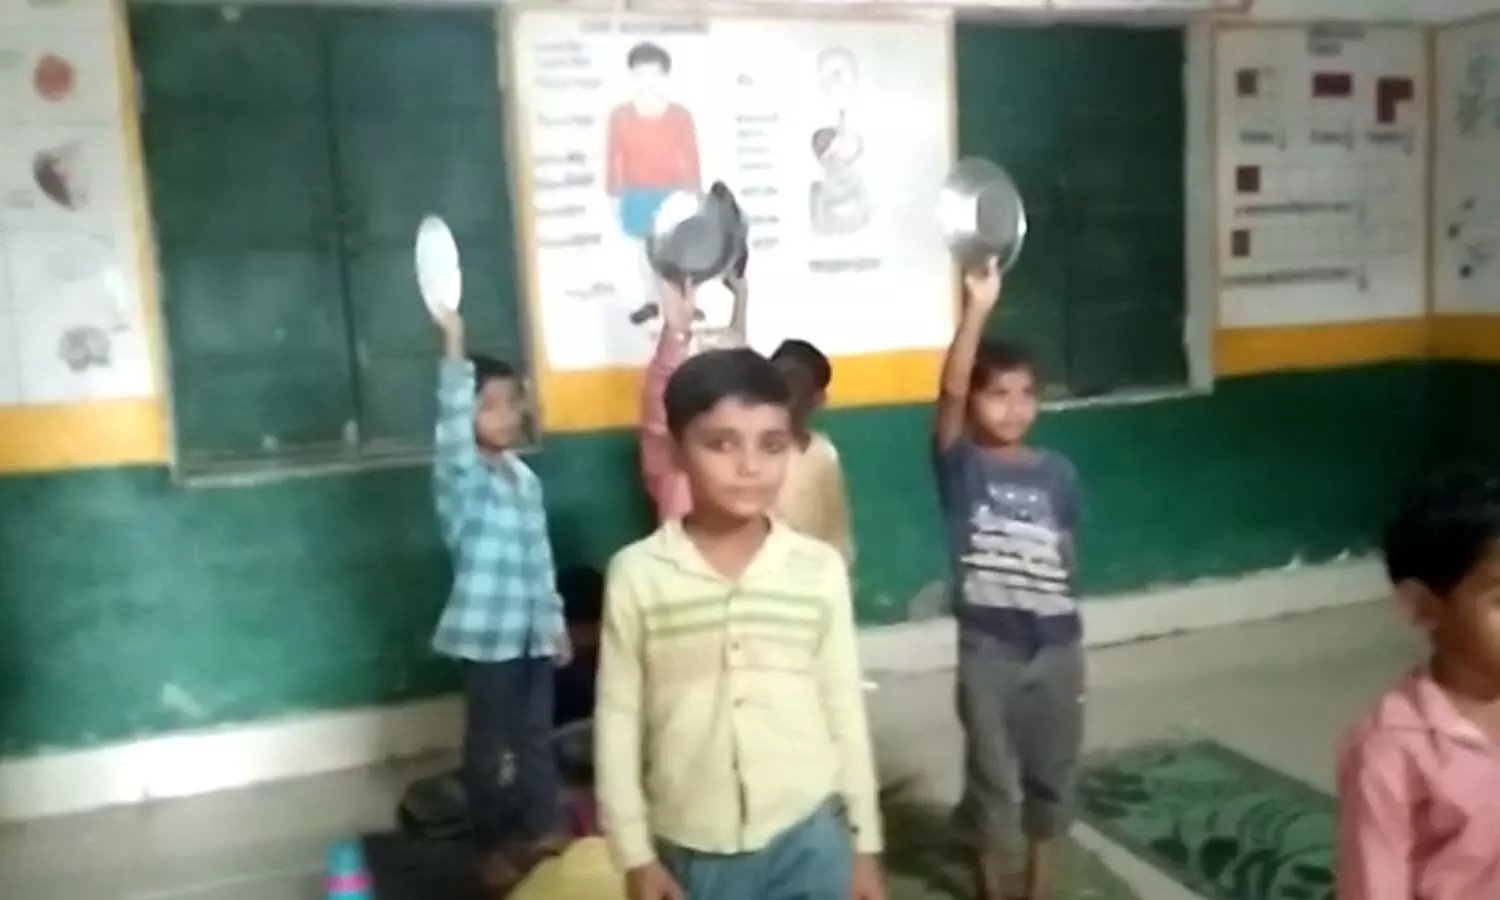 Casteism is happening with Dalit children of Dilwal Primary School in Kanpur Dehat